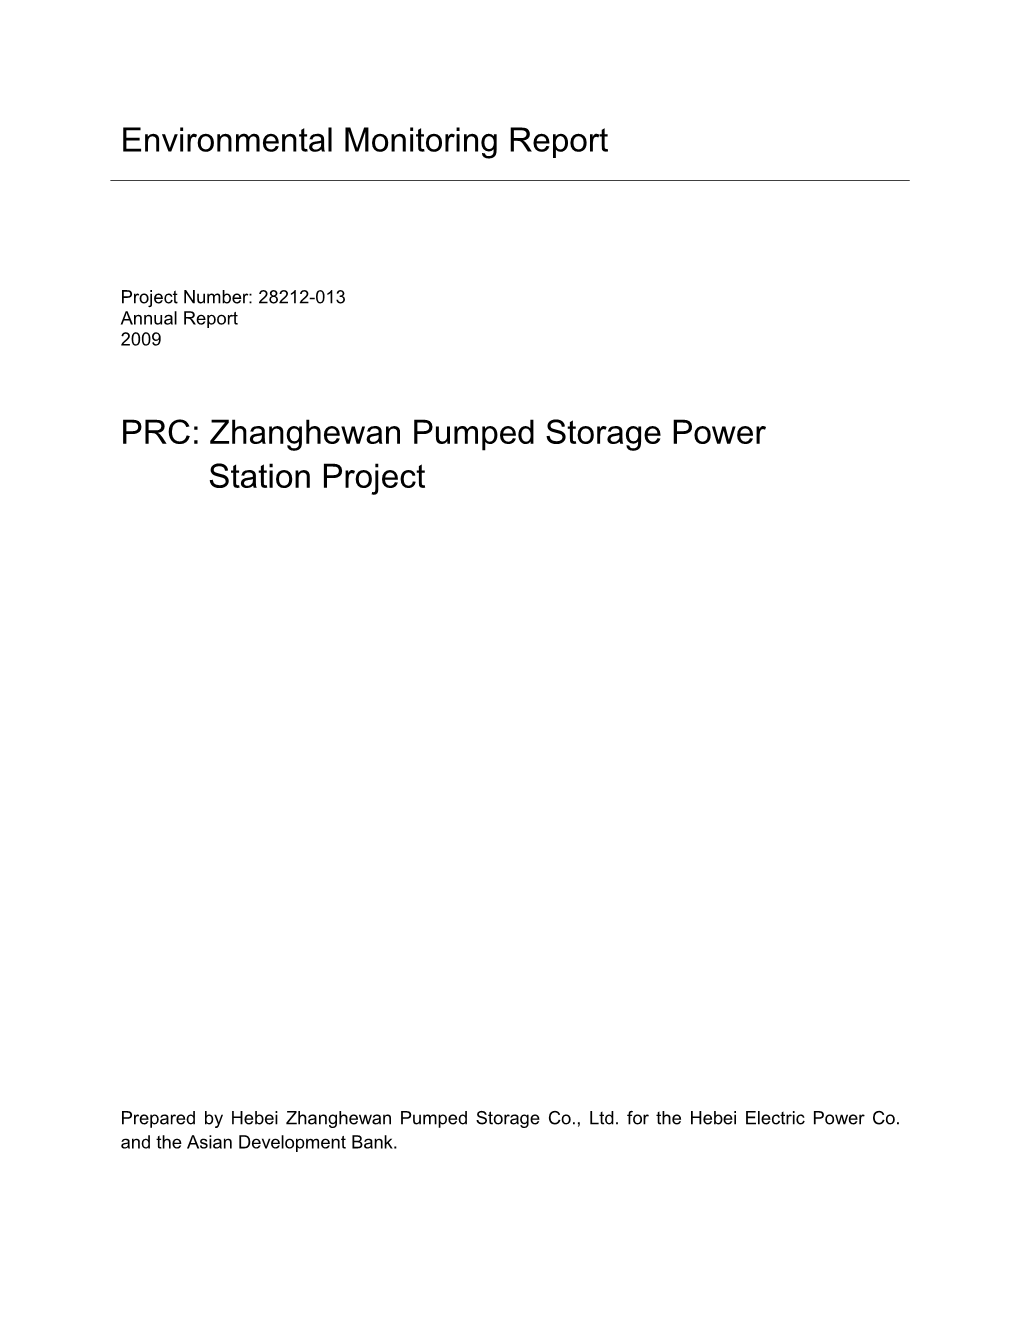 Environmental Monitoring Report PRC: Zhanghewan Pumped Storage Power Station Project